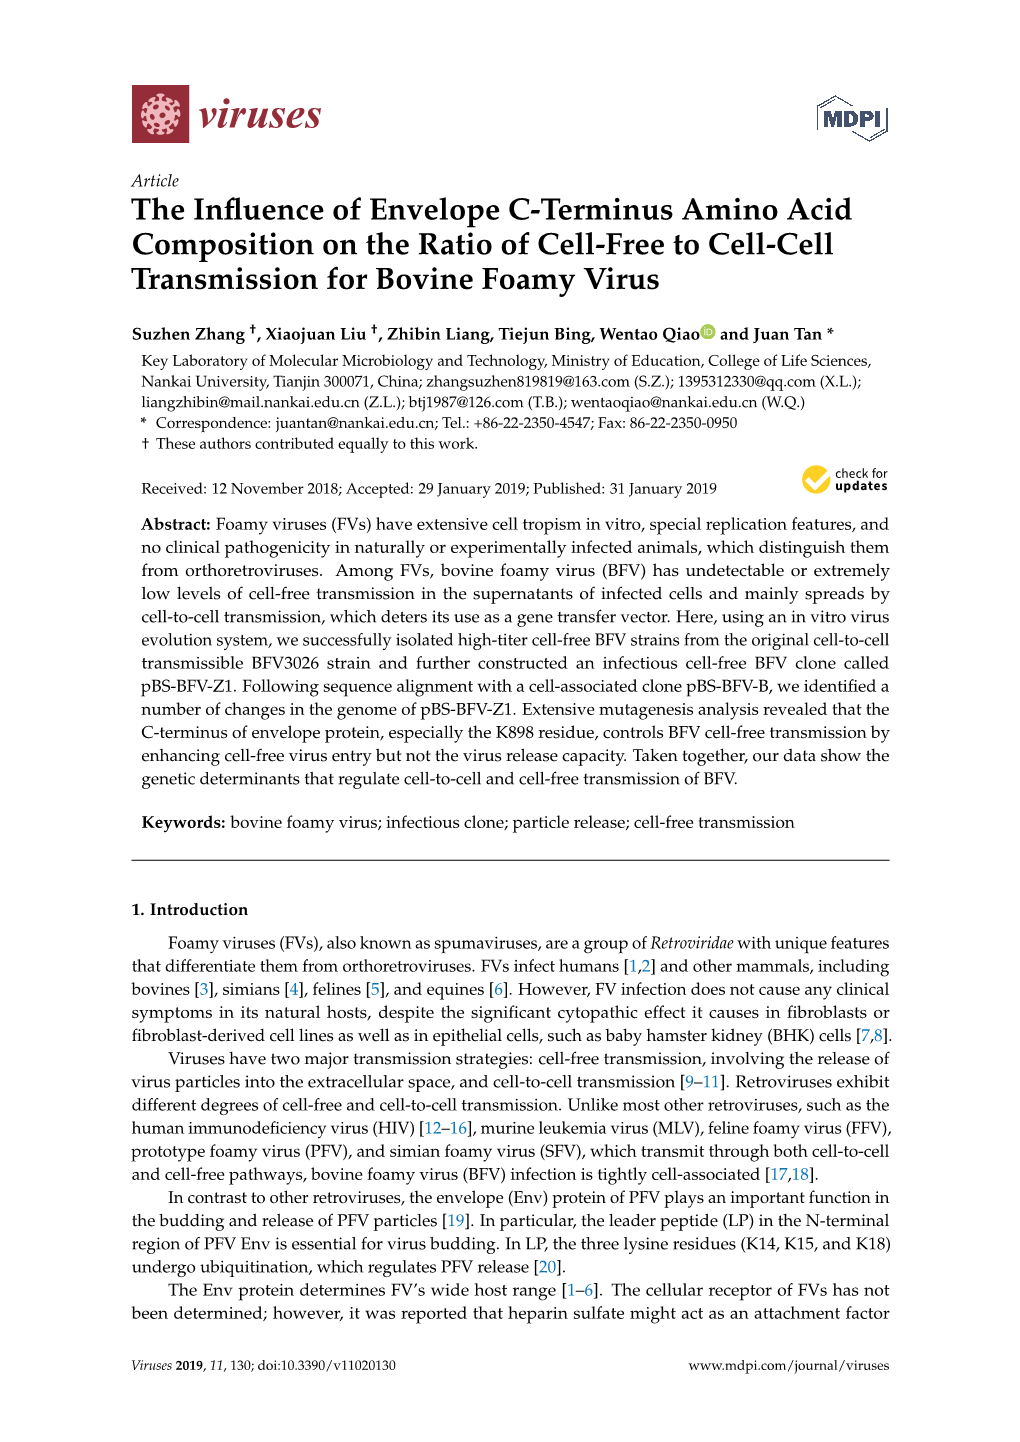 The Influence of Envelope C-Terminus Amino Acid Composition on the Ratio of Cell-Free to Cell-Cell Transmission for Bovine Foamy Virus